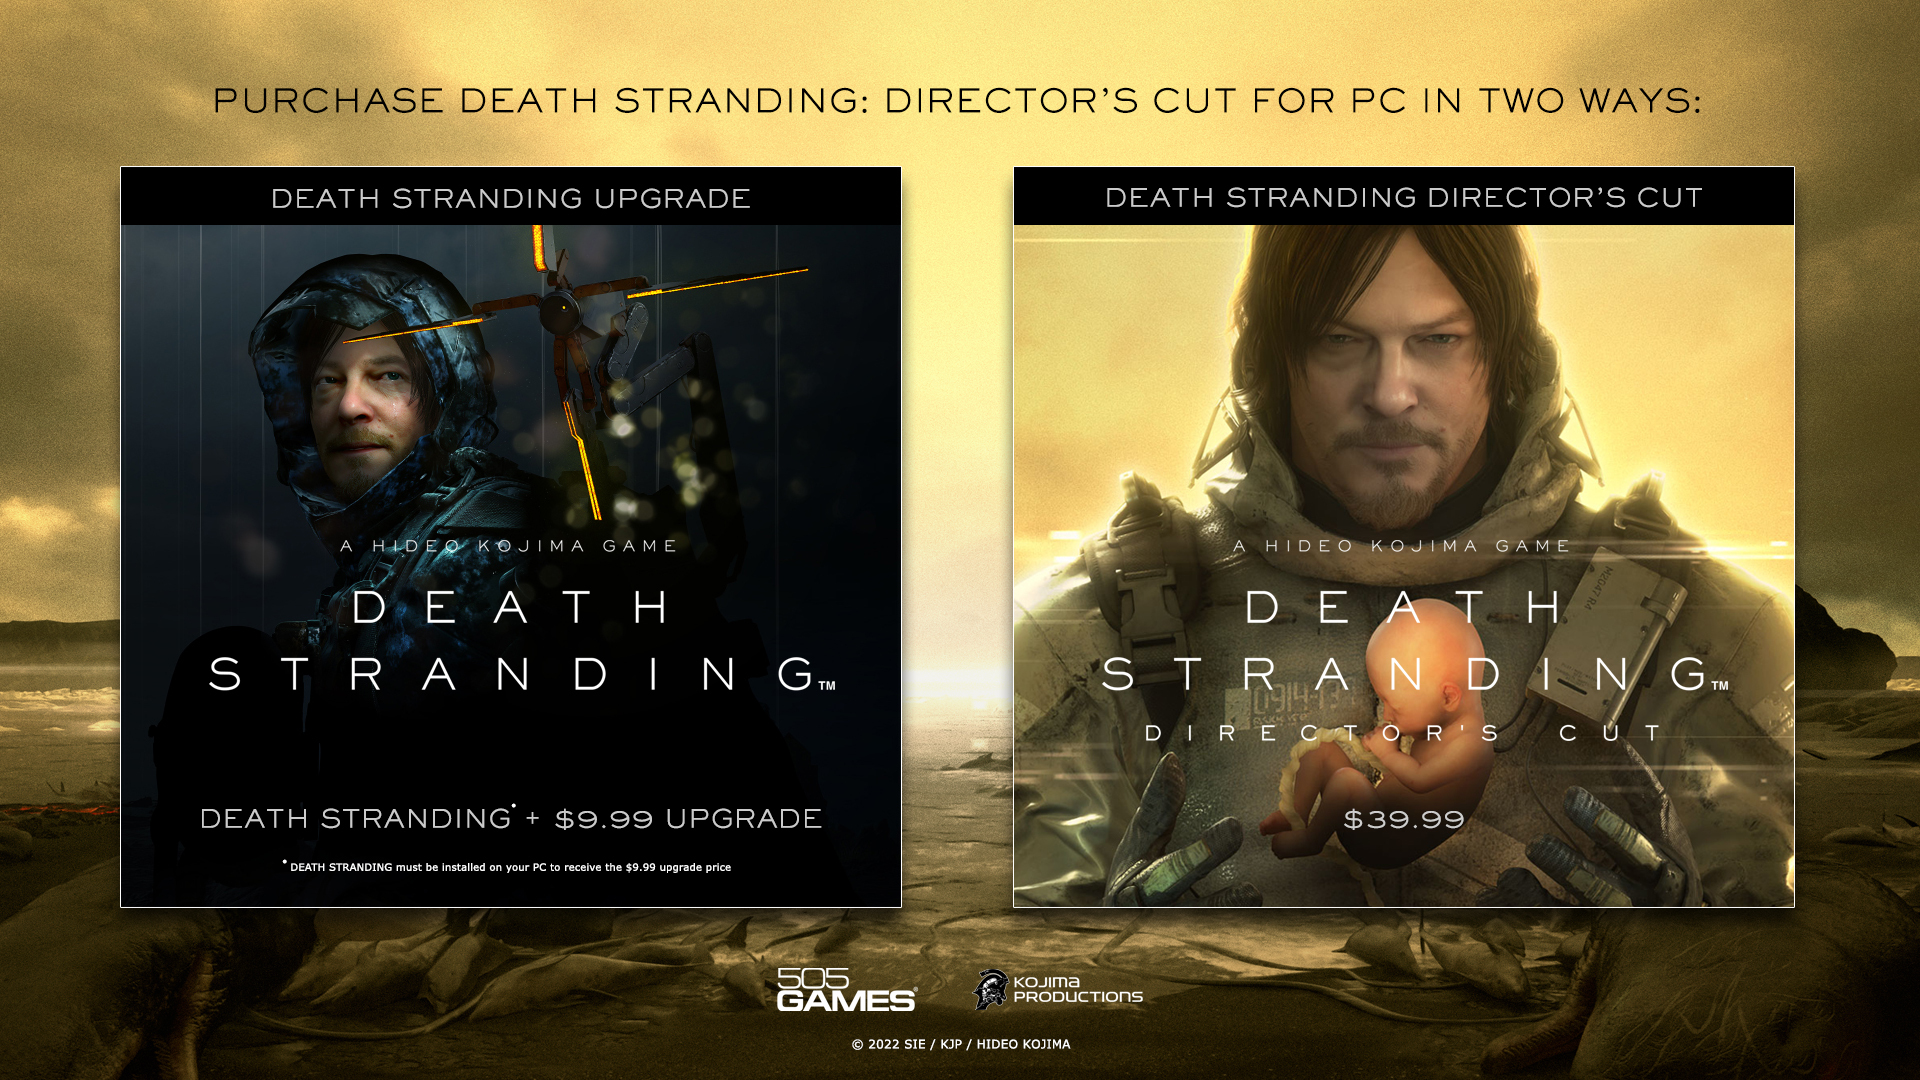 GermanStrands on Twitter  Death stranding ps4, Stuff and thangs